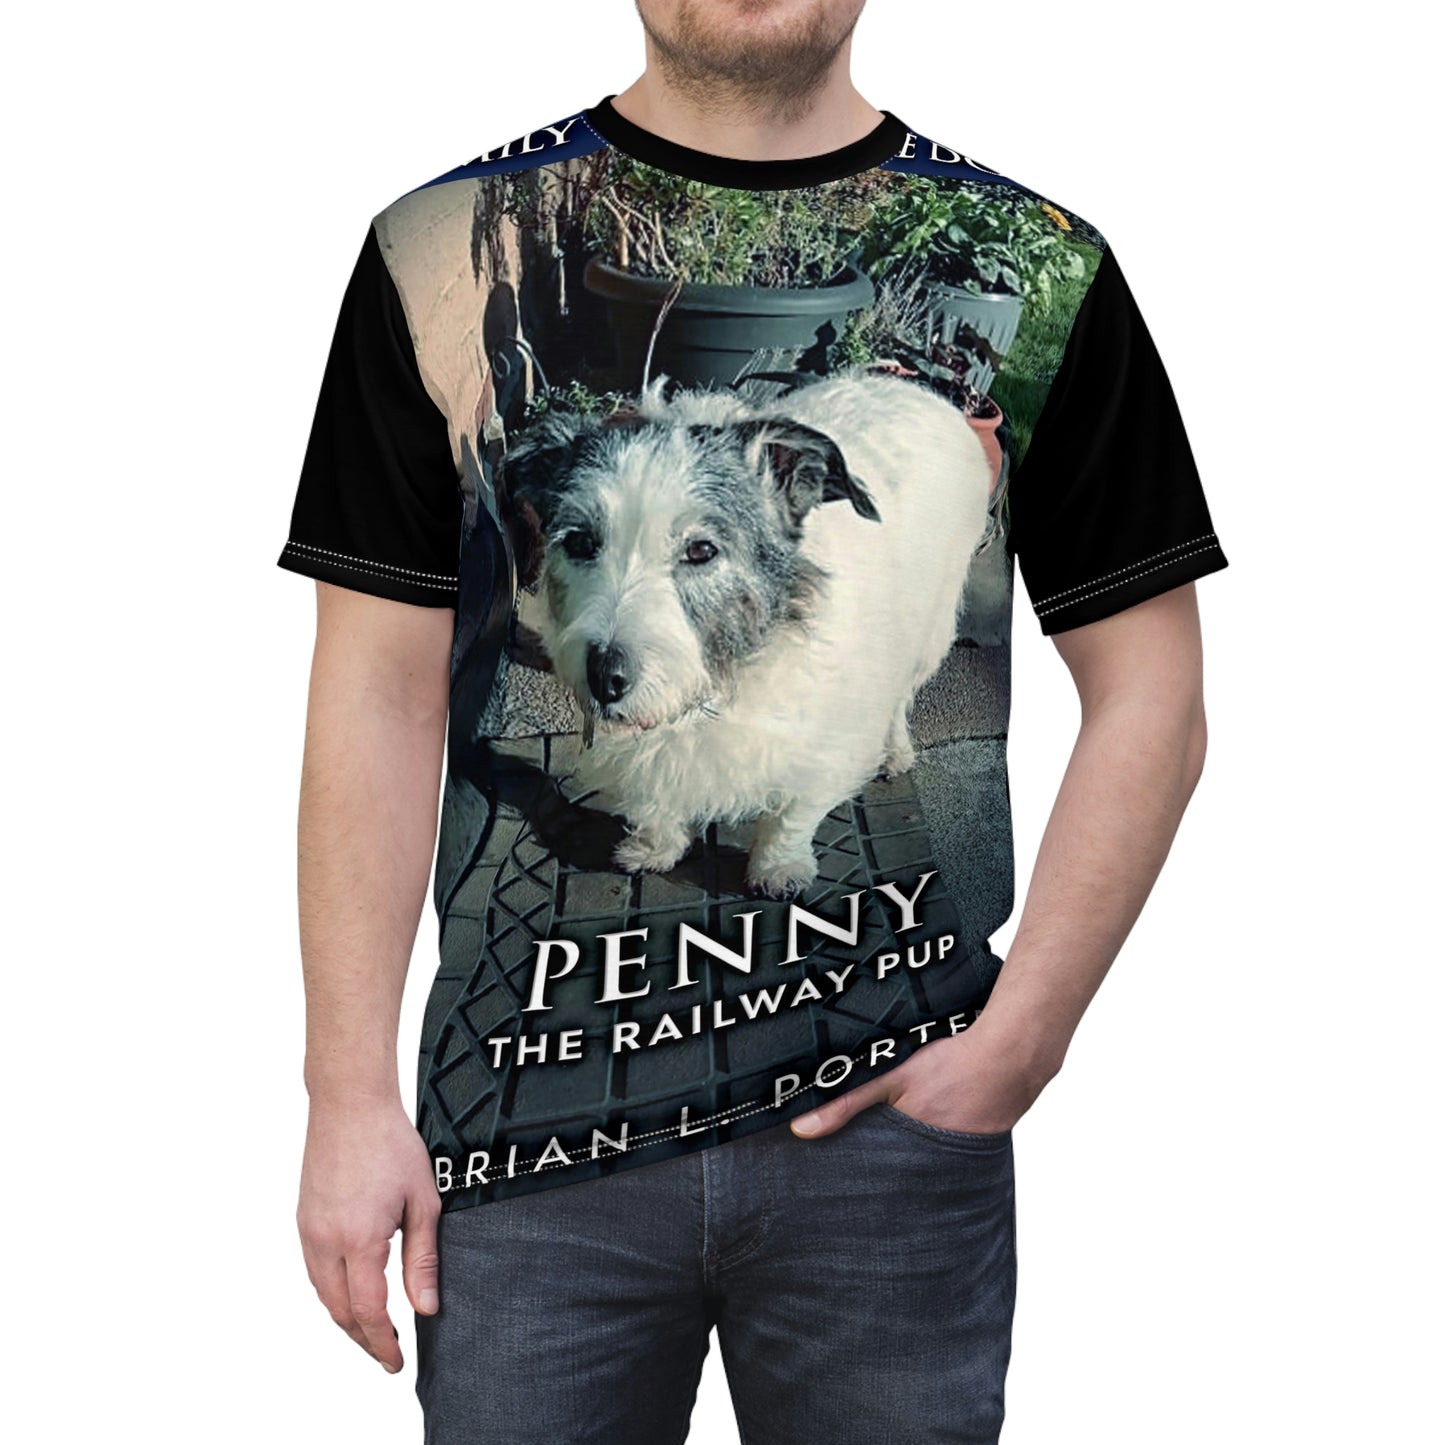 Penny The Railway Pup - Unisex All-Over Print Cut & Sew T-Shirt